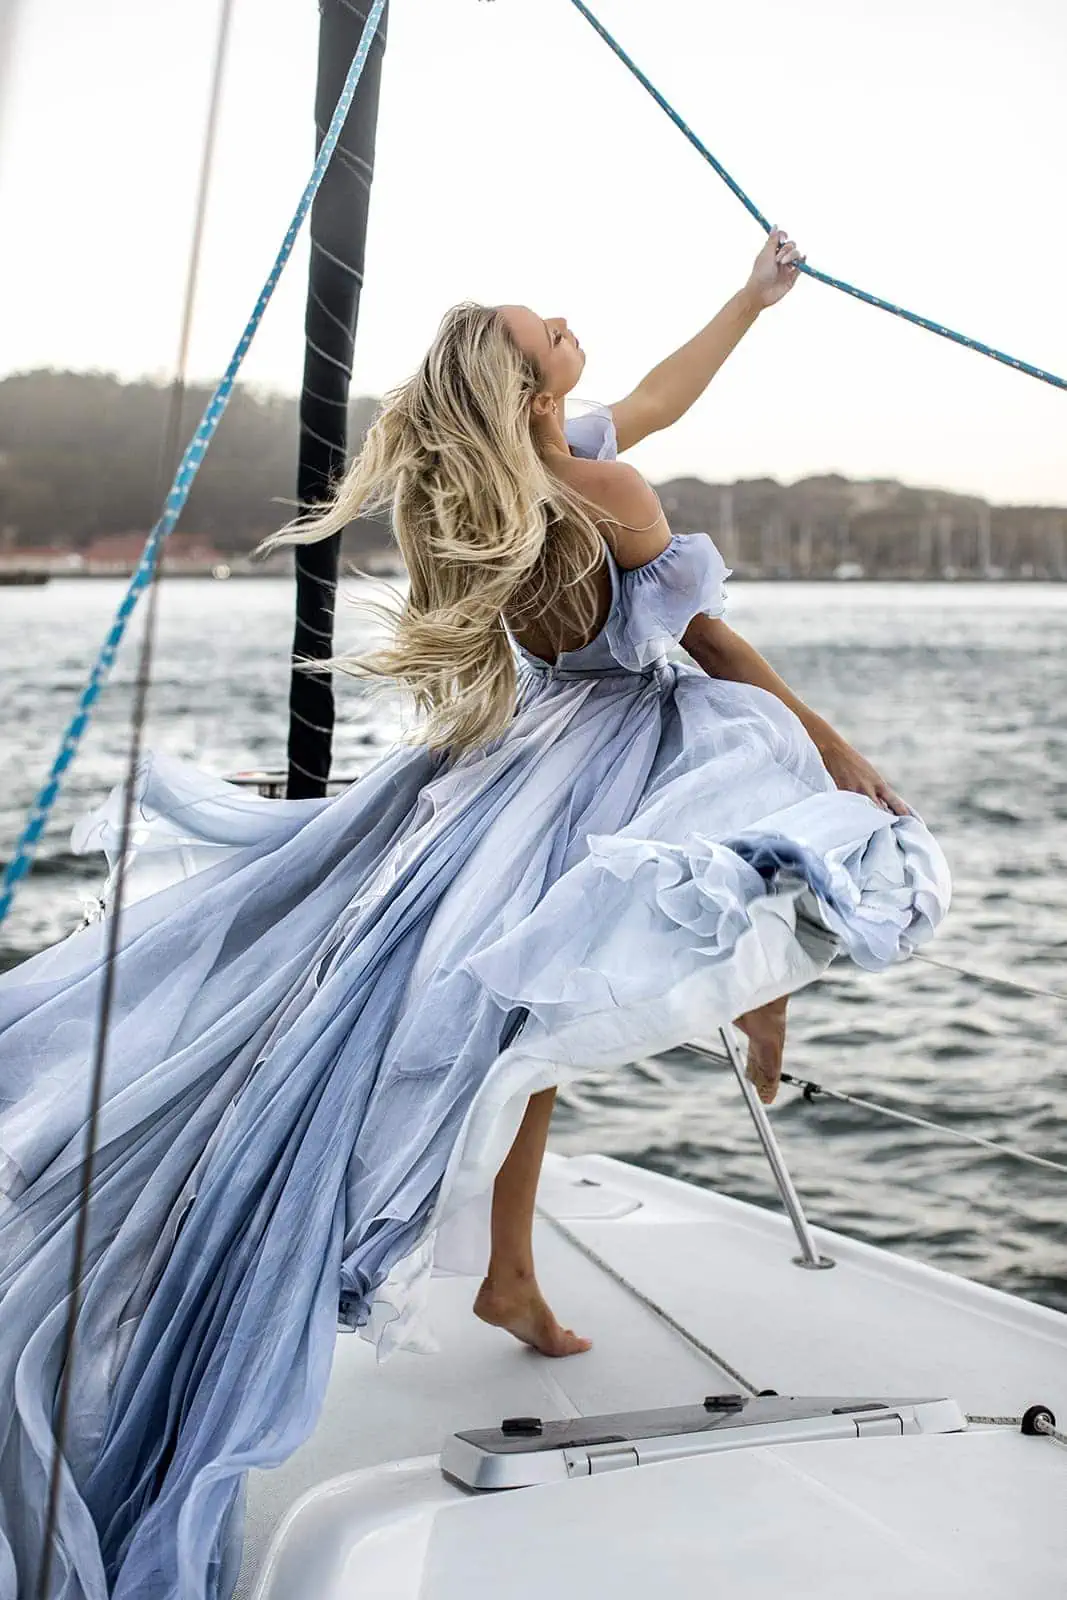 Woman stands on sailboat wearing Leanne Marshall gown